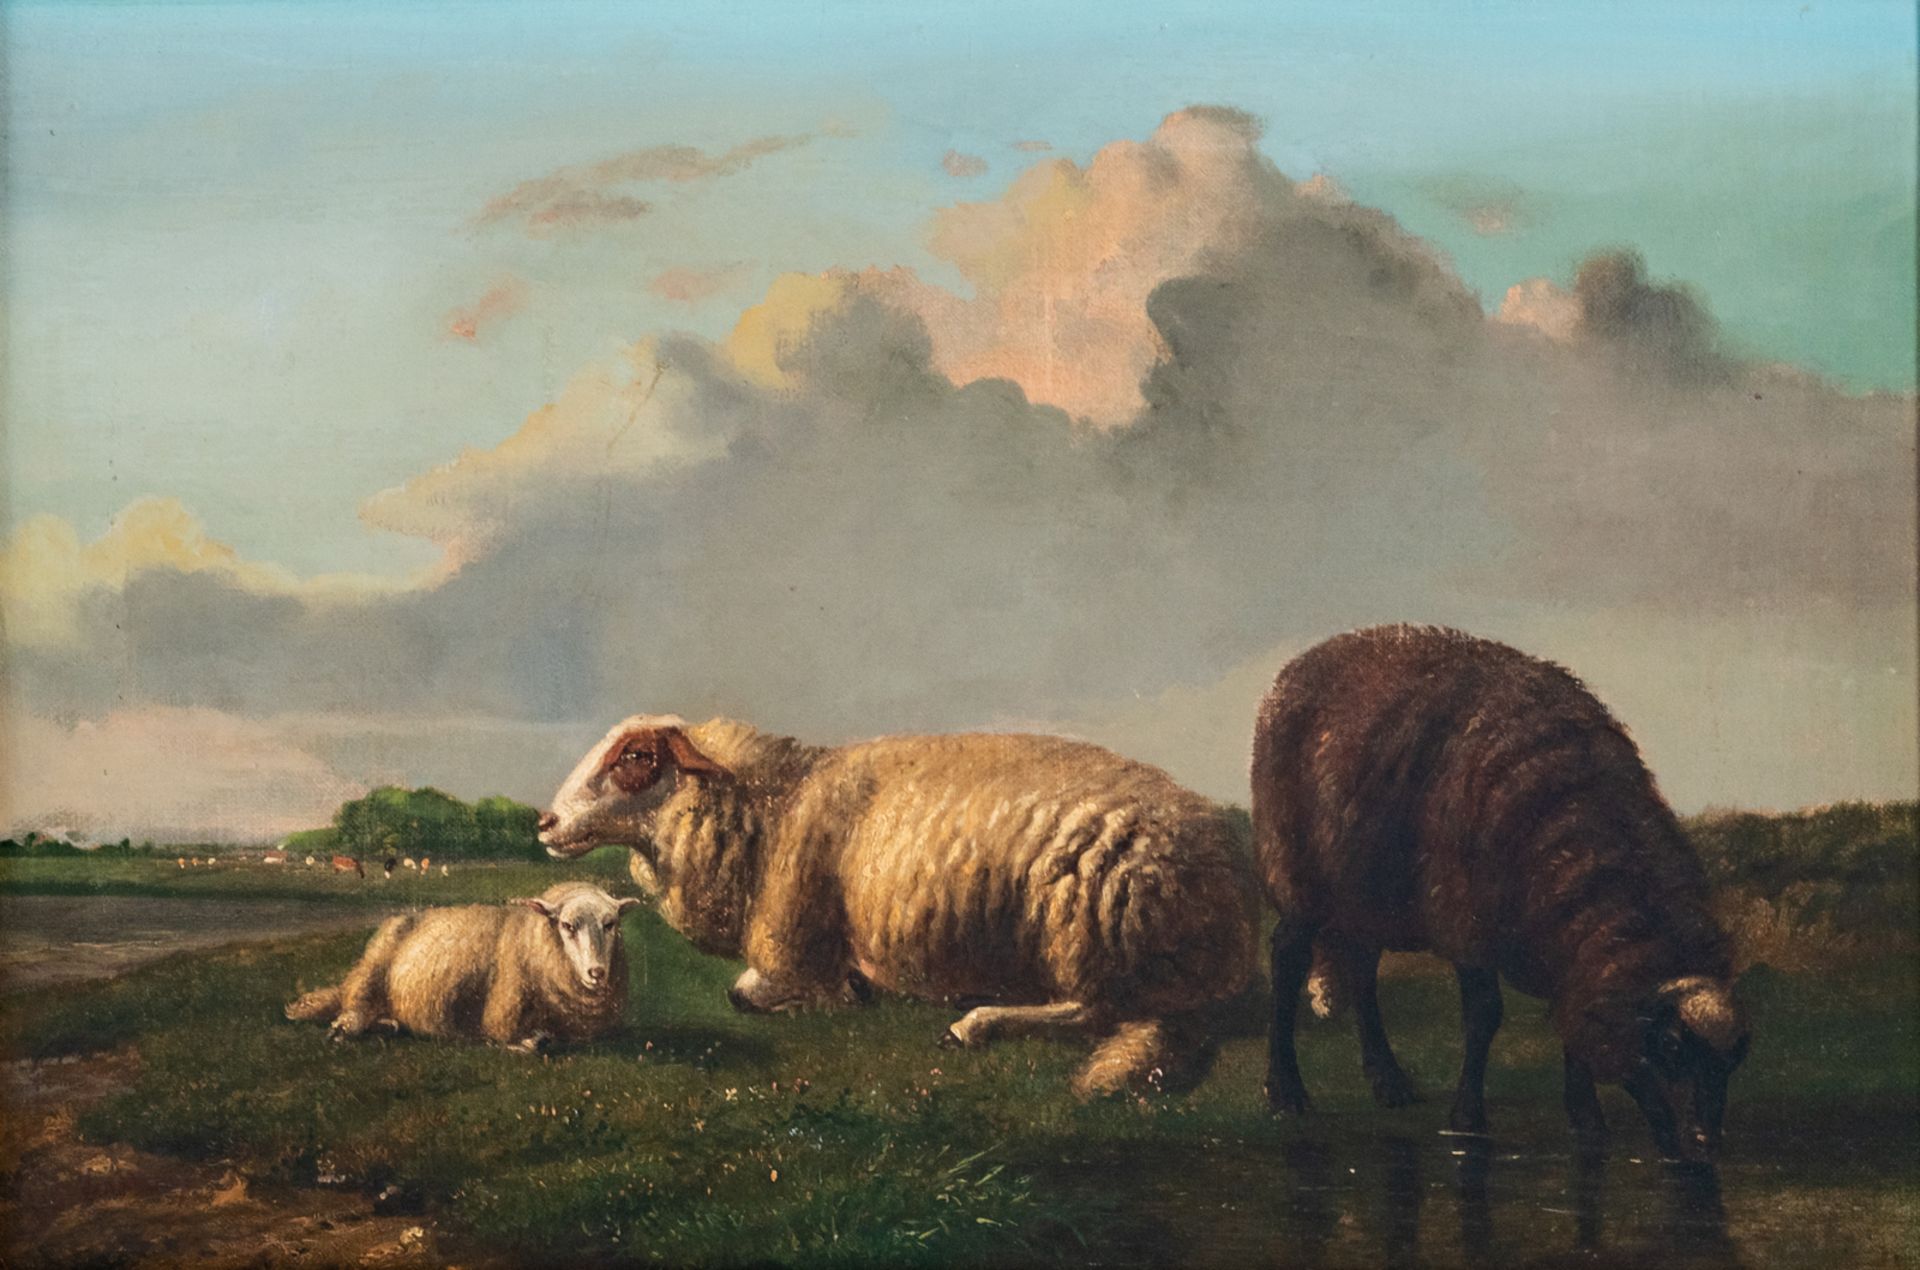 Verwee L.P., sheep in a meadow, oil on canvas, 37 x 54 cm